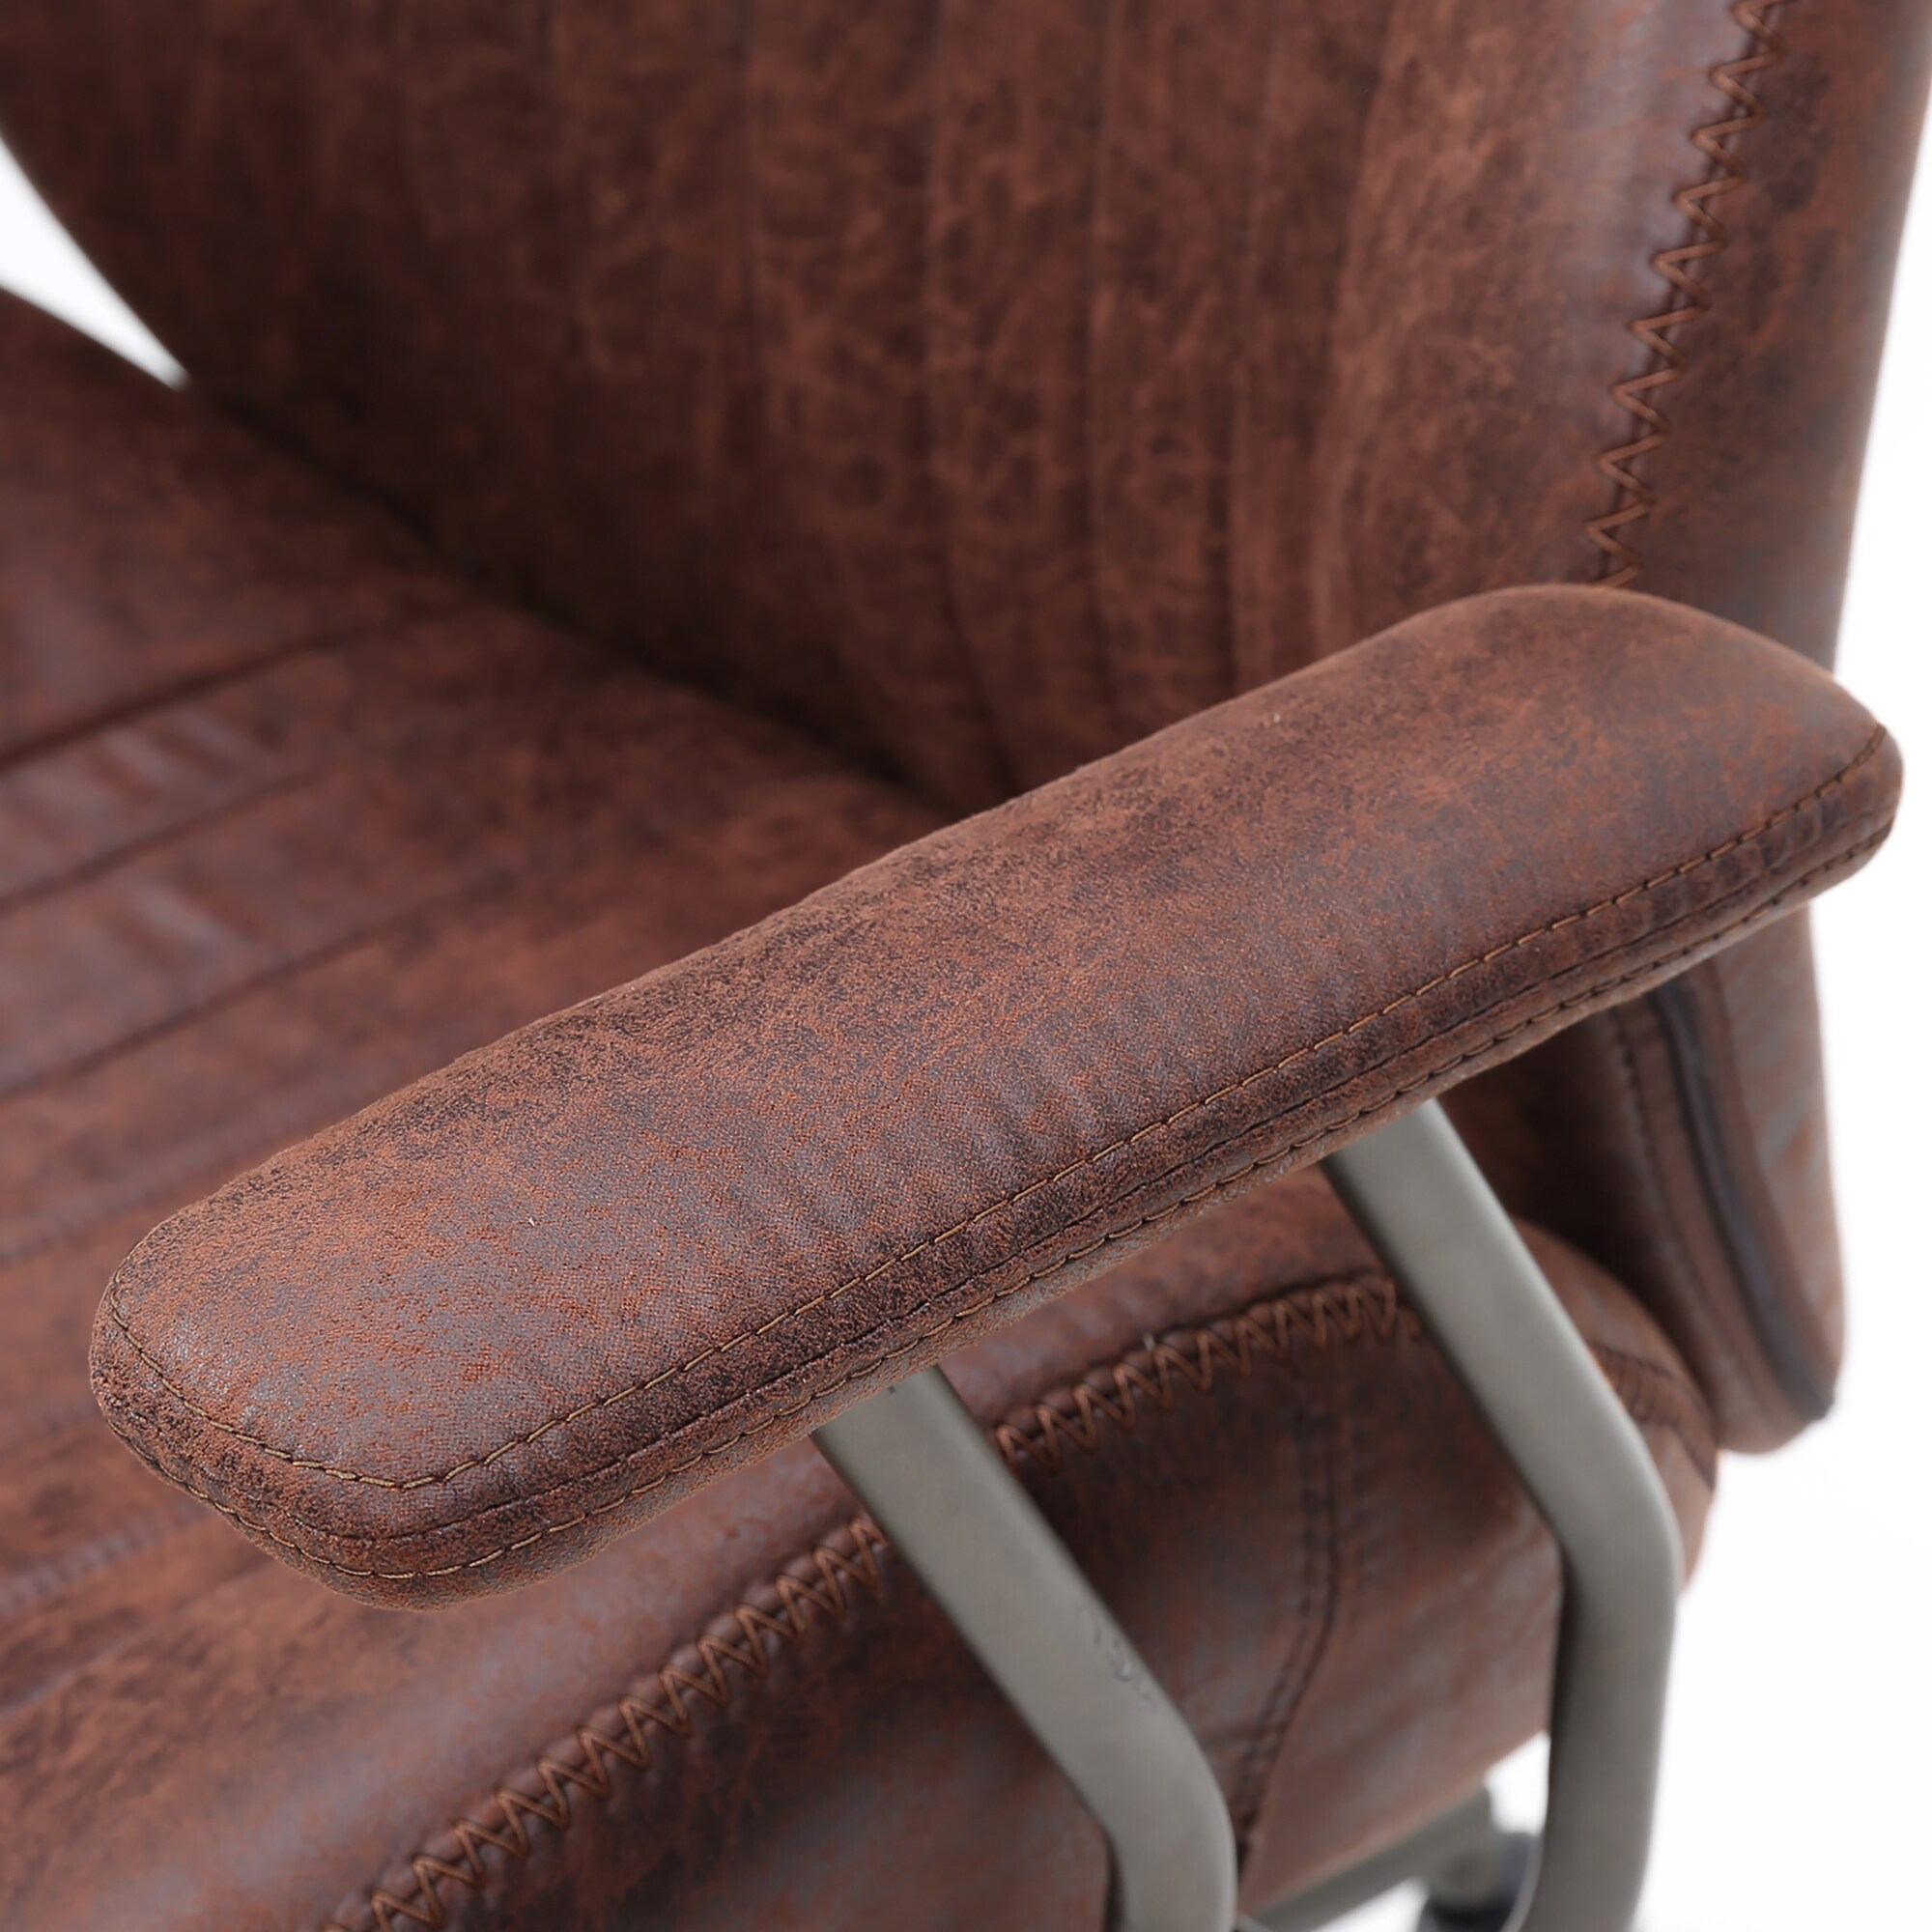 https://ak1.ostkcdn.com/images/products/is/images/direct/2351ba64bcd35da0cf33936d0c9b888809ef7bbc/OVIOS-Suede-Fabric-Ergonomic-Office-Chair-High-Back-Lumbar-Support.jpg